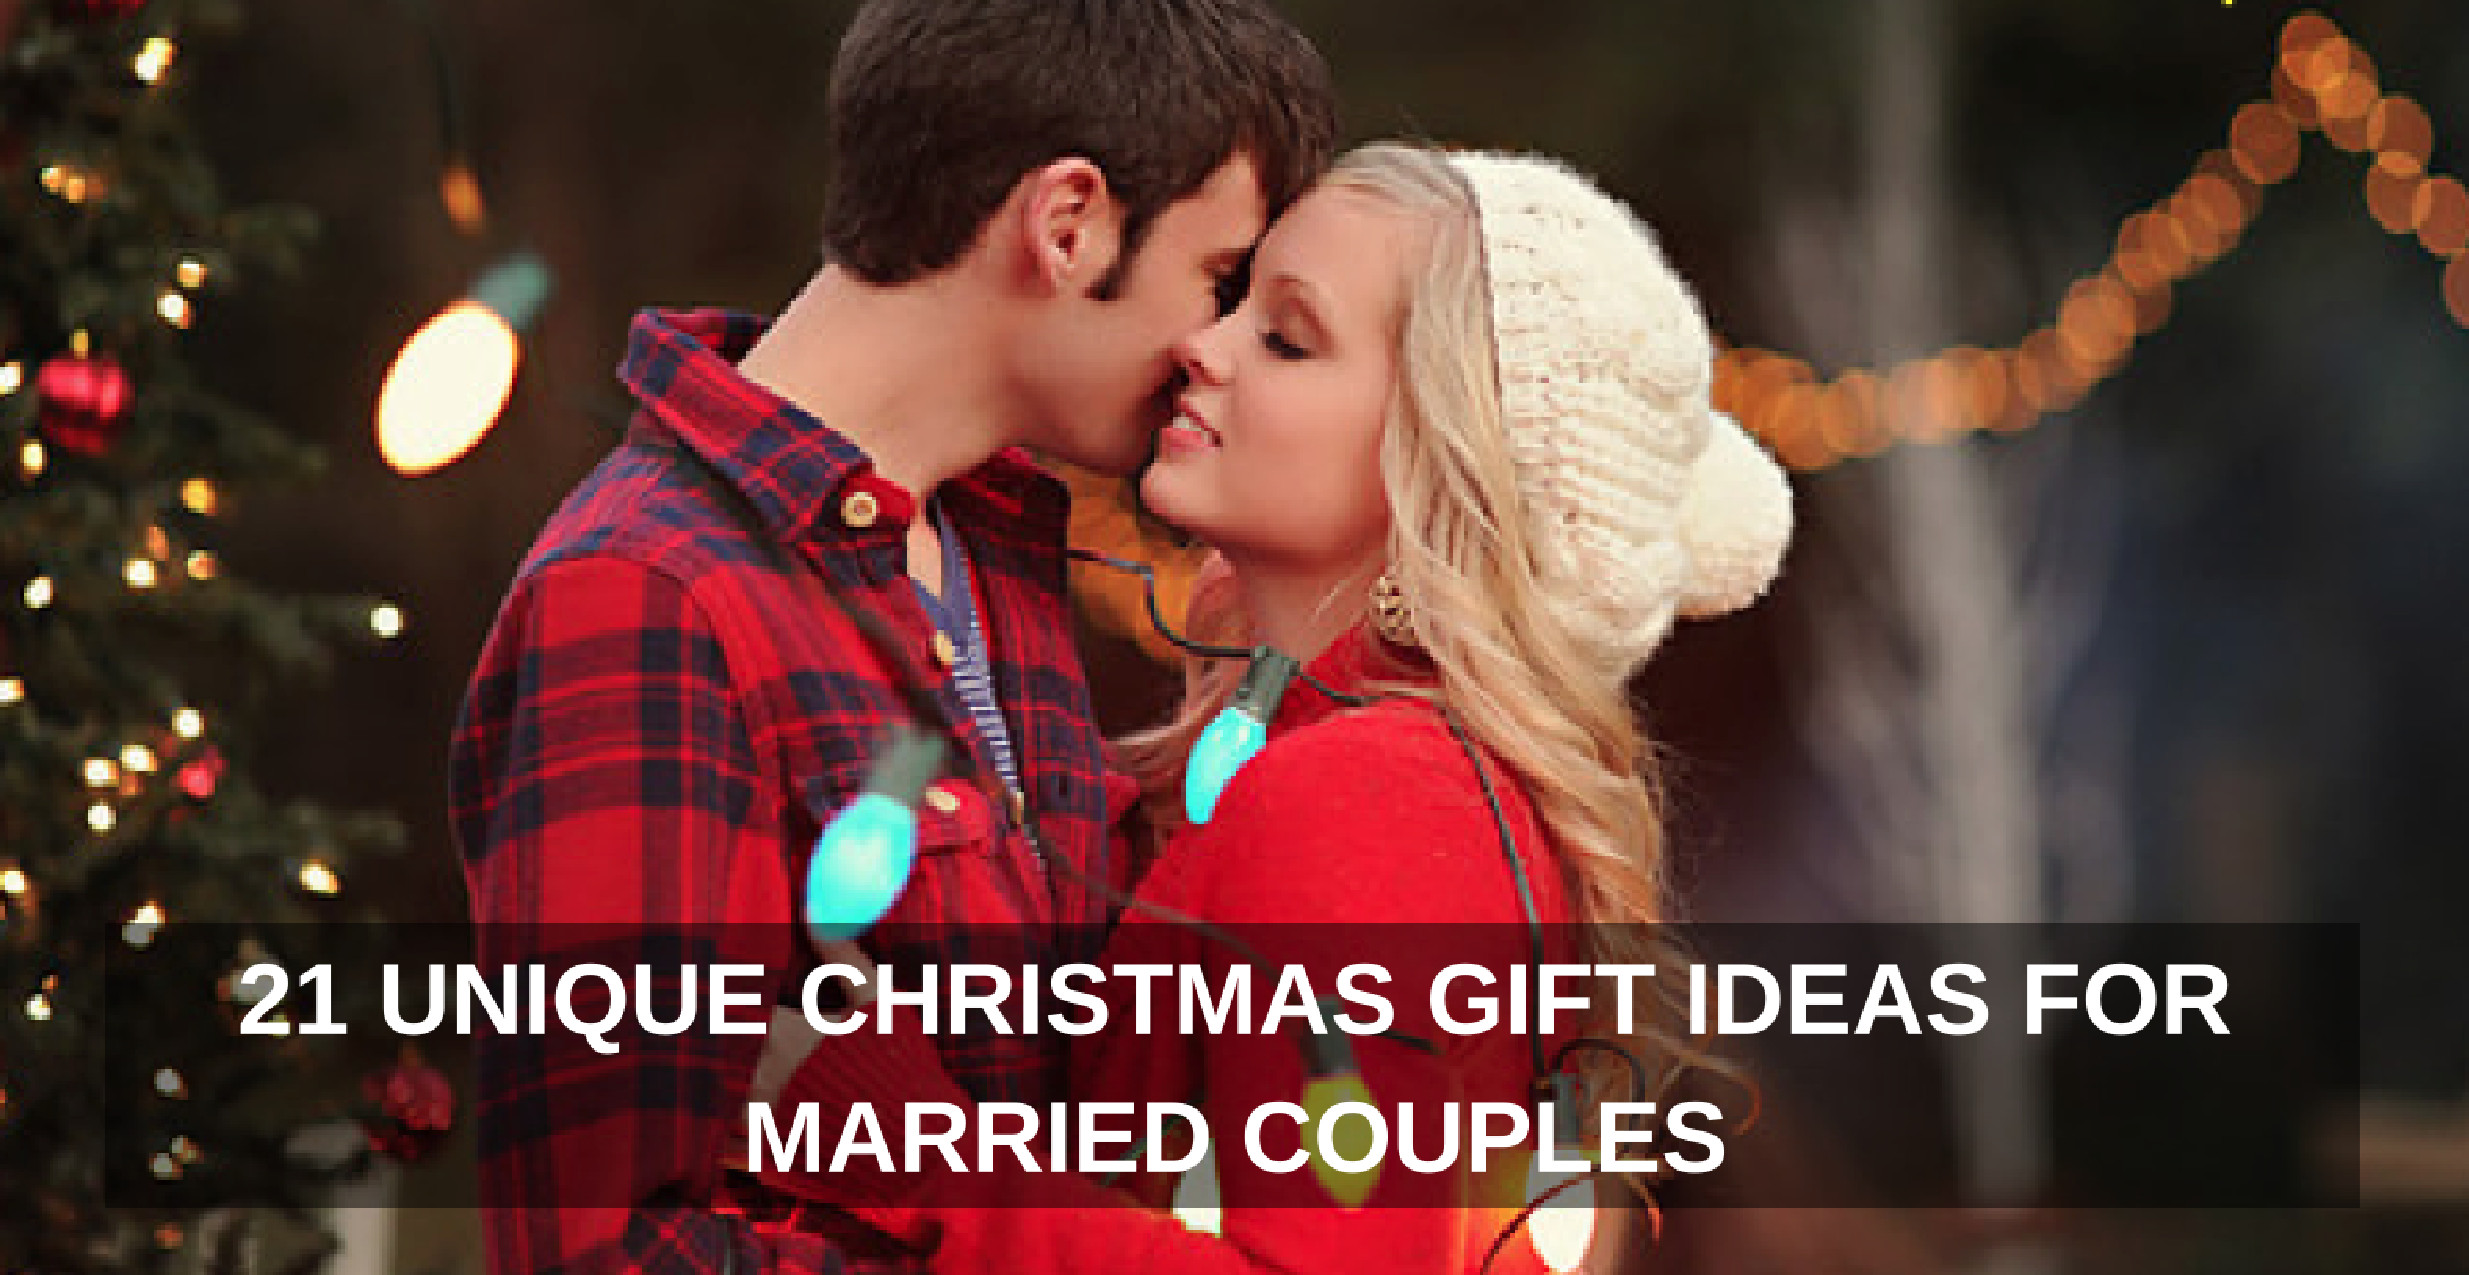 Couples Gift Ideas Christmas
 21 Unique Christmas Gift Ideas for Married Couples